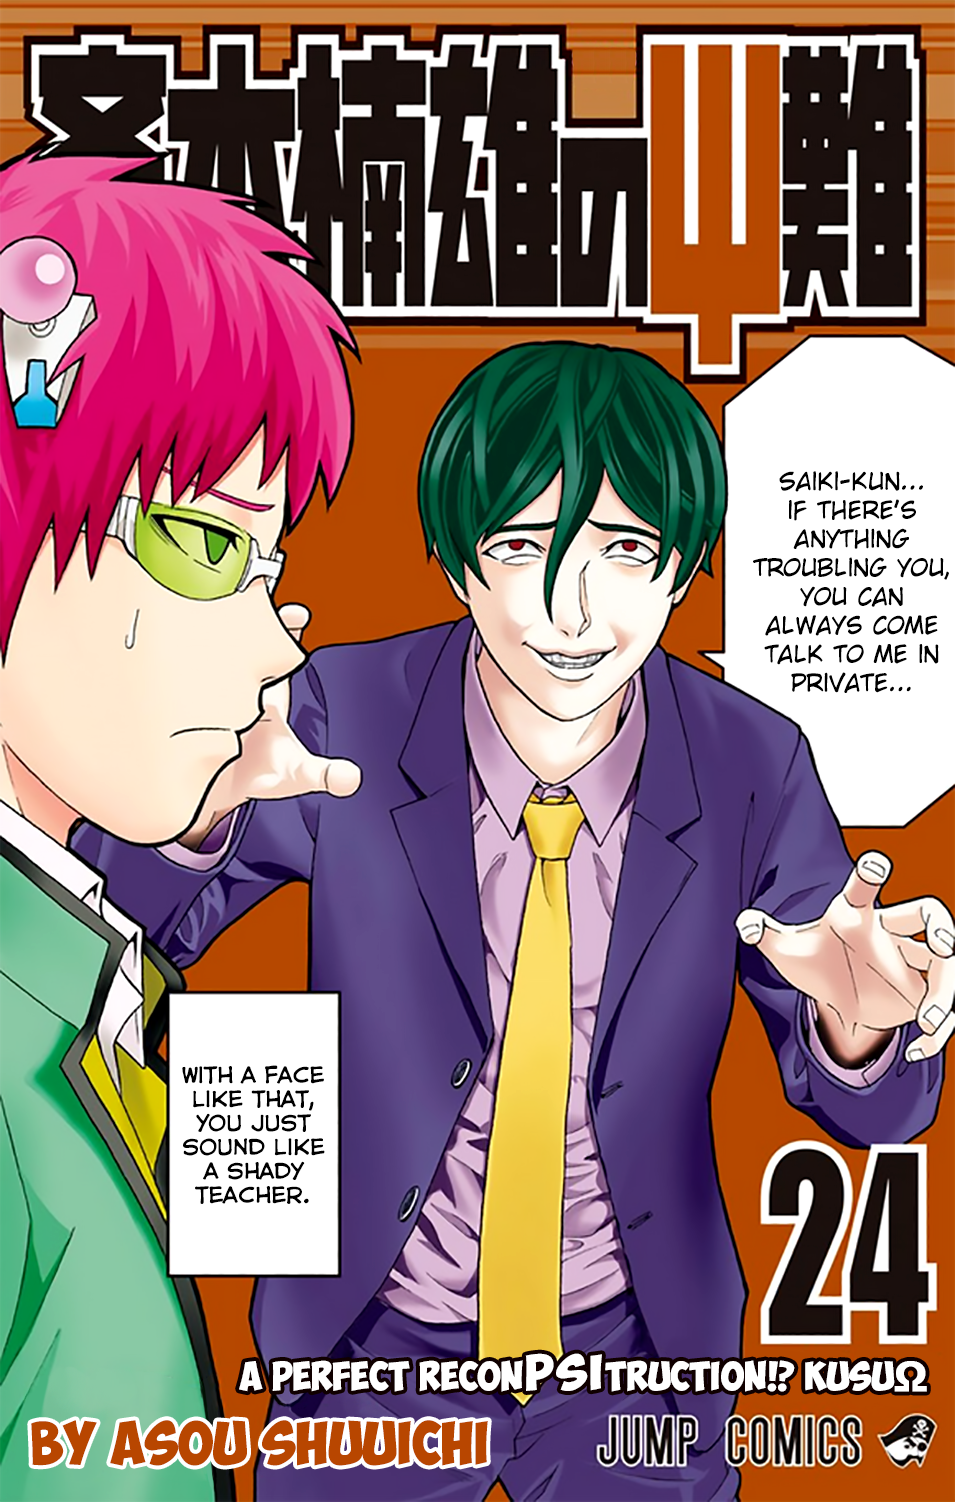 Saiki Kusuo no Sainan Vol.24 Chapter 251: ViPSIting a Friend's House While Their Parents are Out